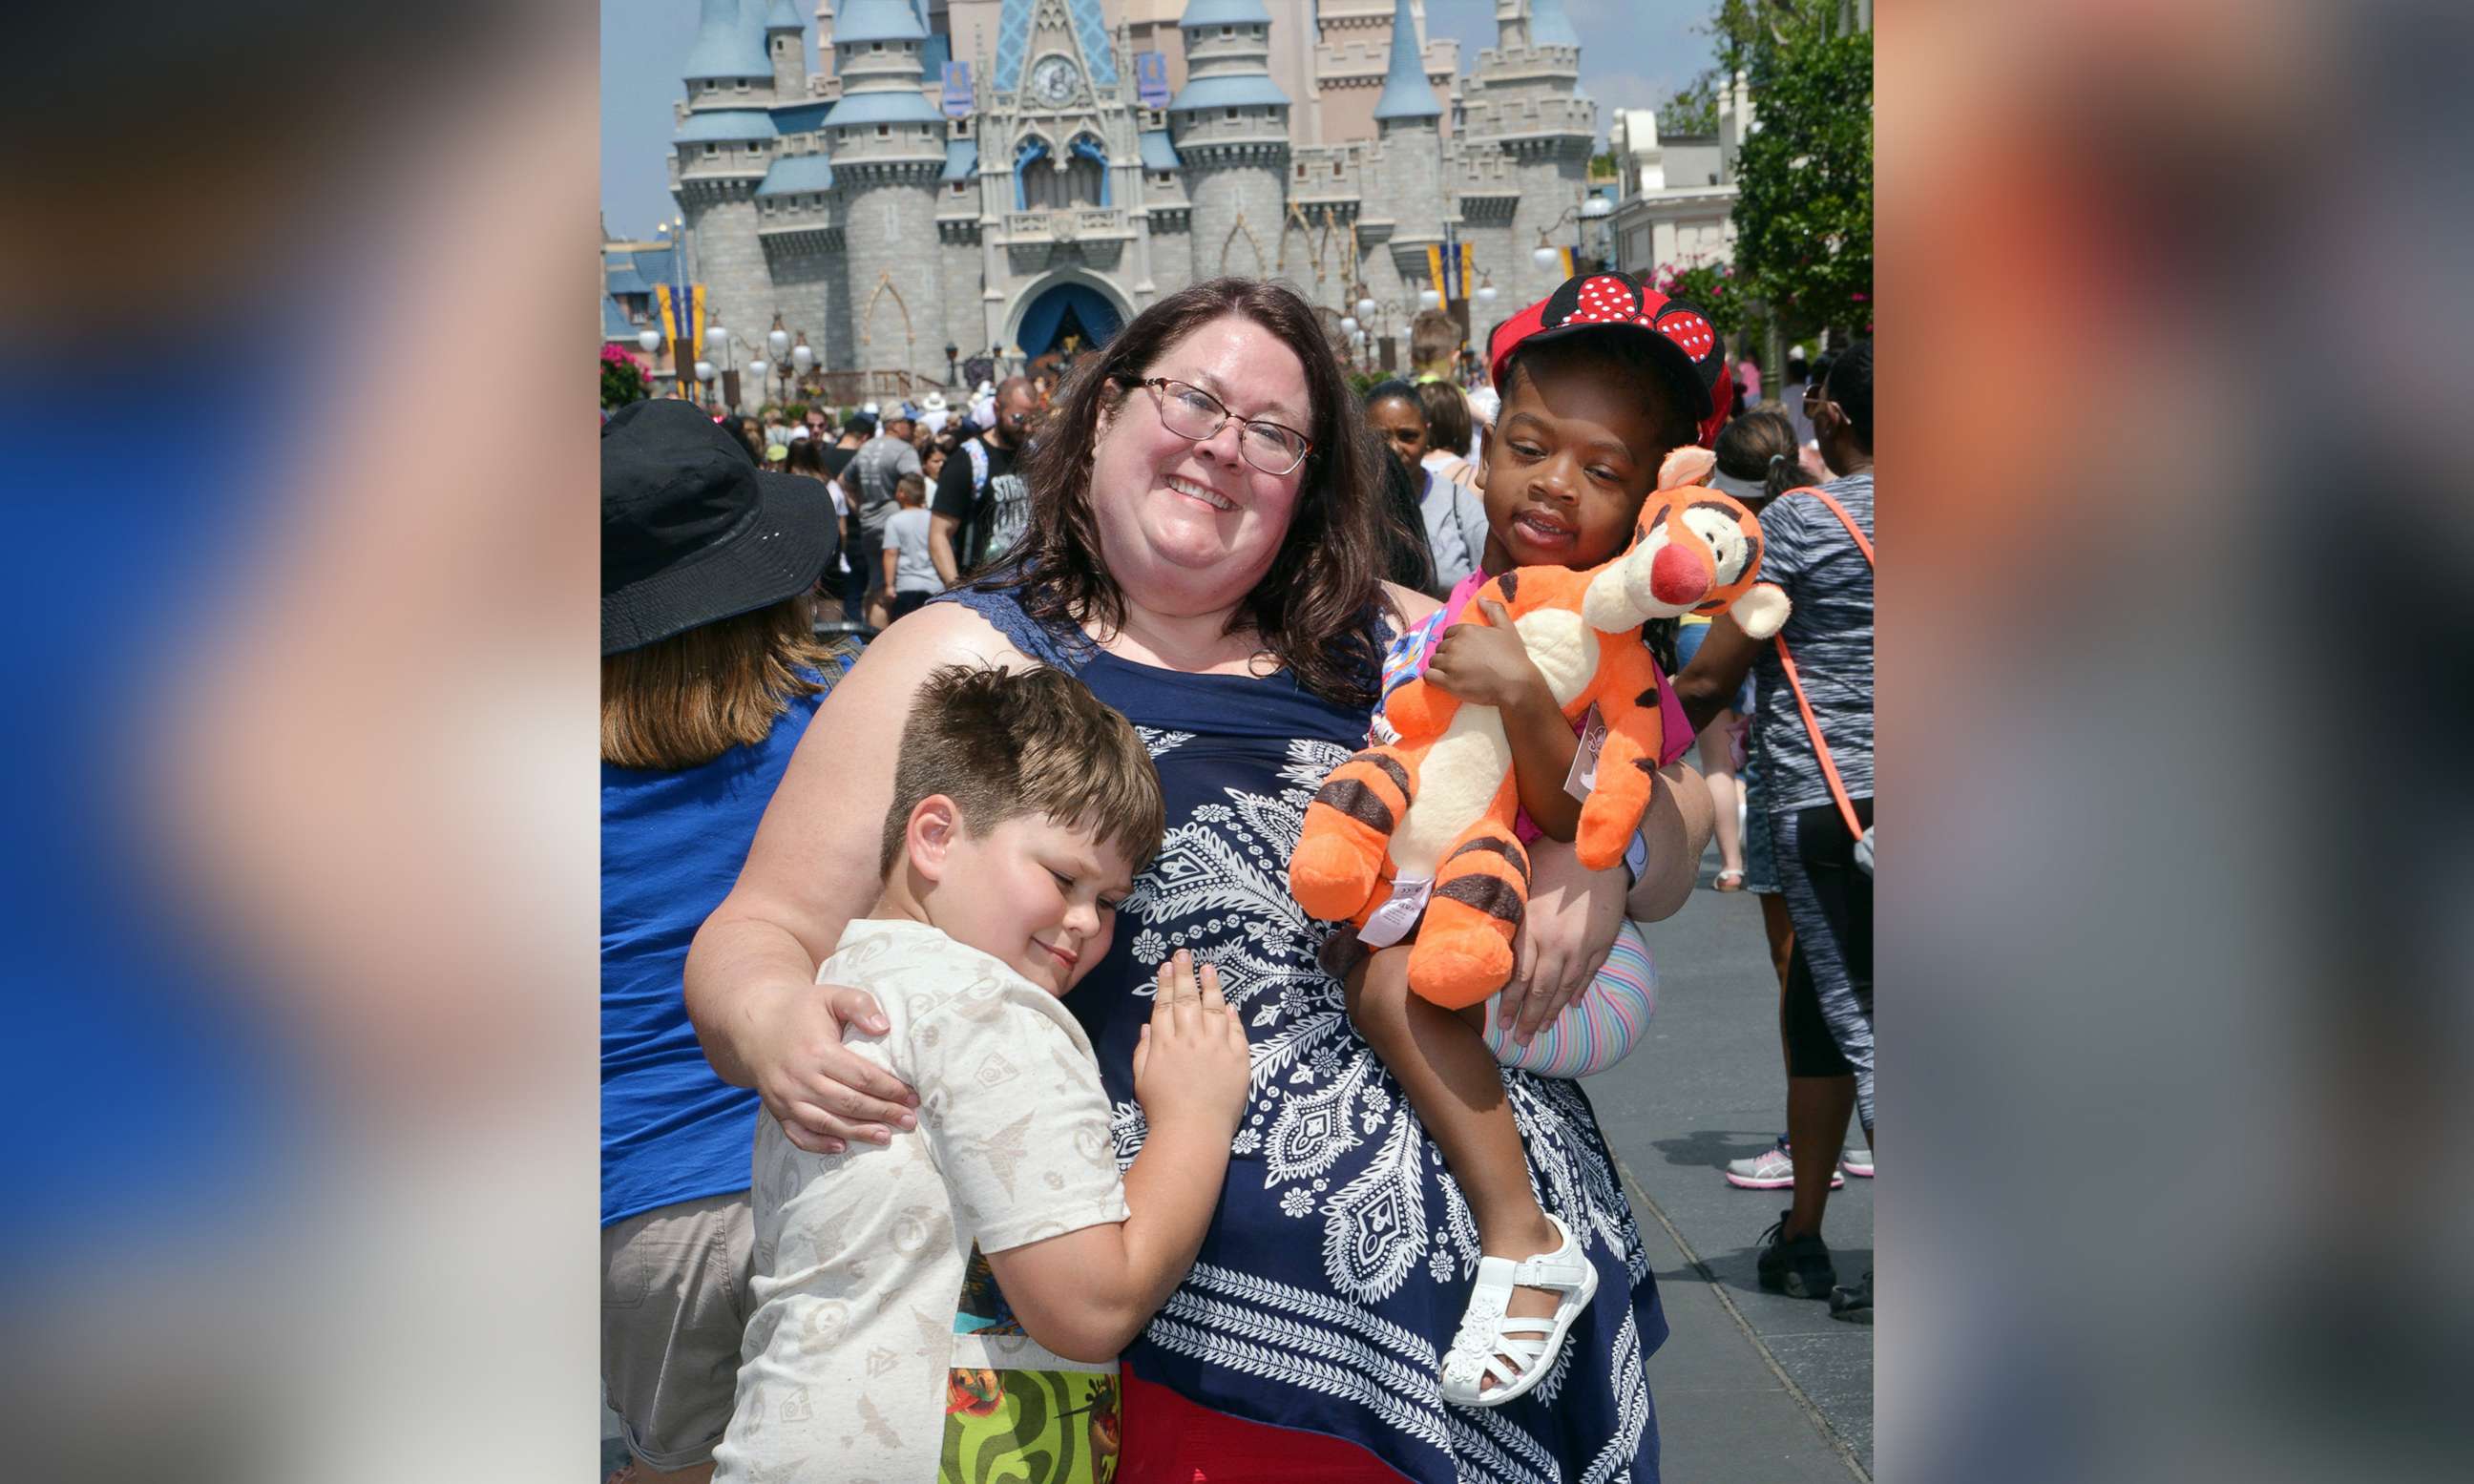 PHOTO: Alicia Erchul poses with her son, Aidan, and 4-year-old Morgan Price at Walt Disney World in March 2019.